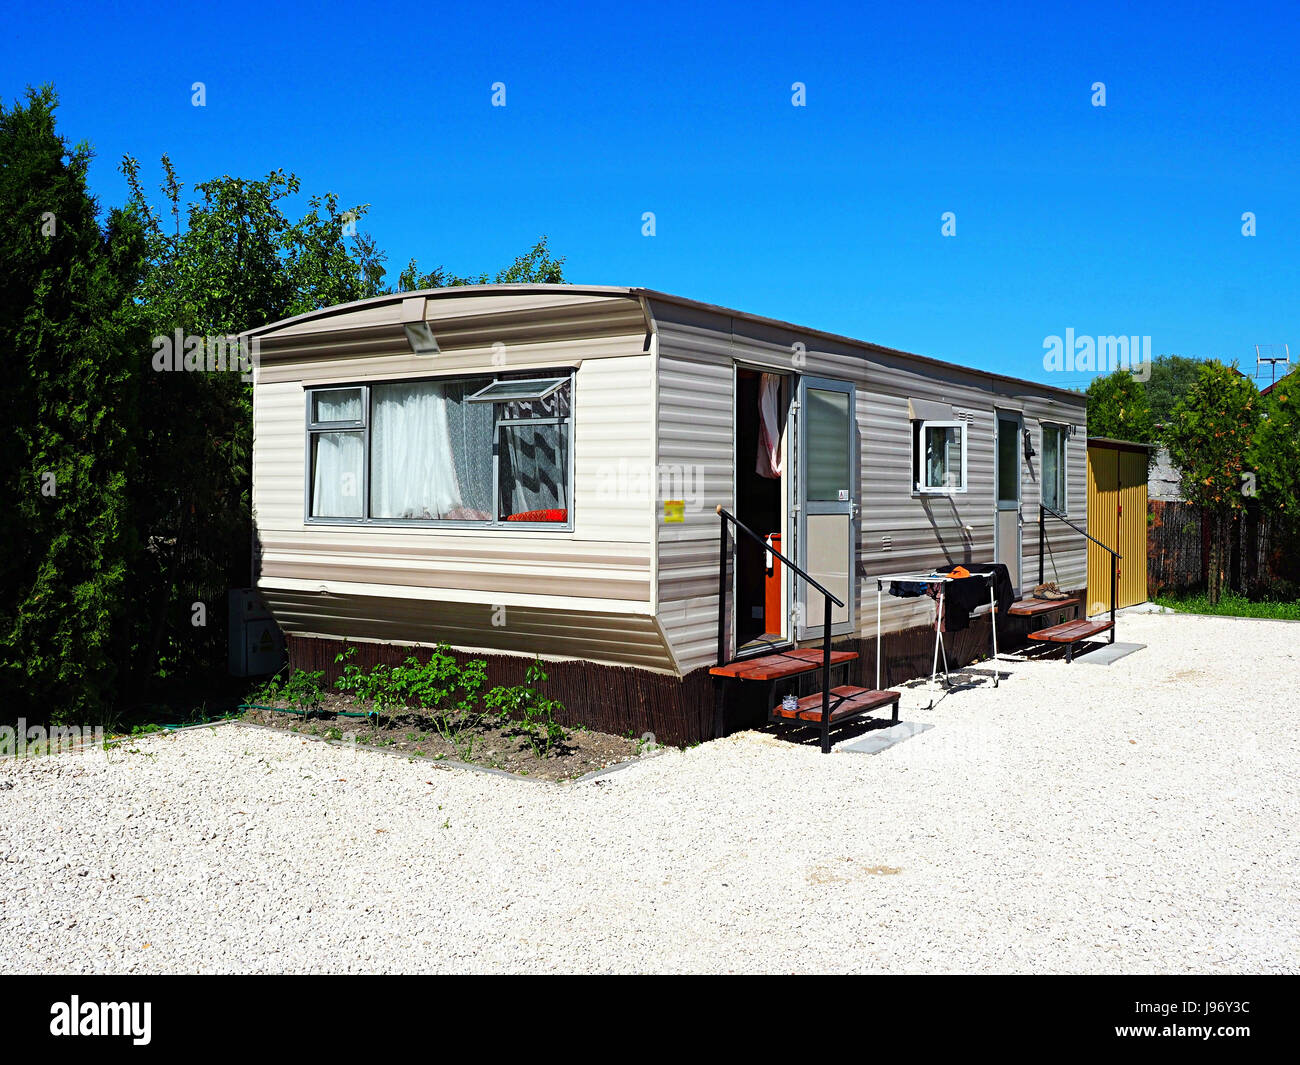 Retro old camping house (bungalow) in a sunny day with a blue sky, family holiday outing Stock Photo